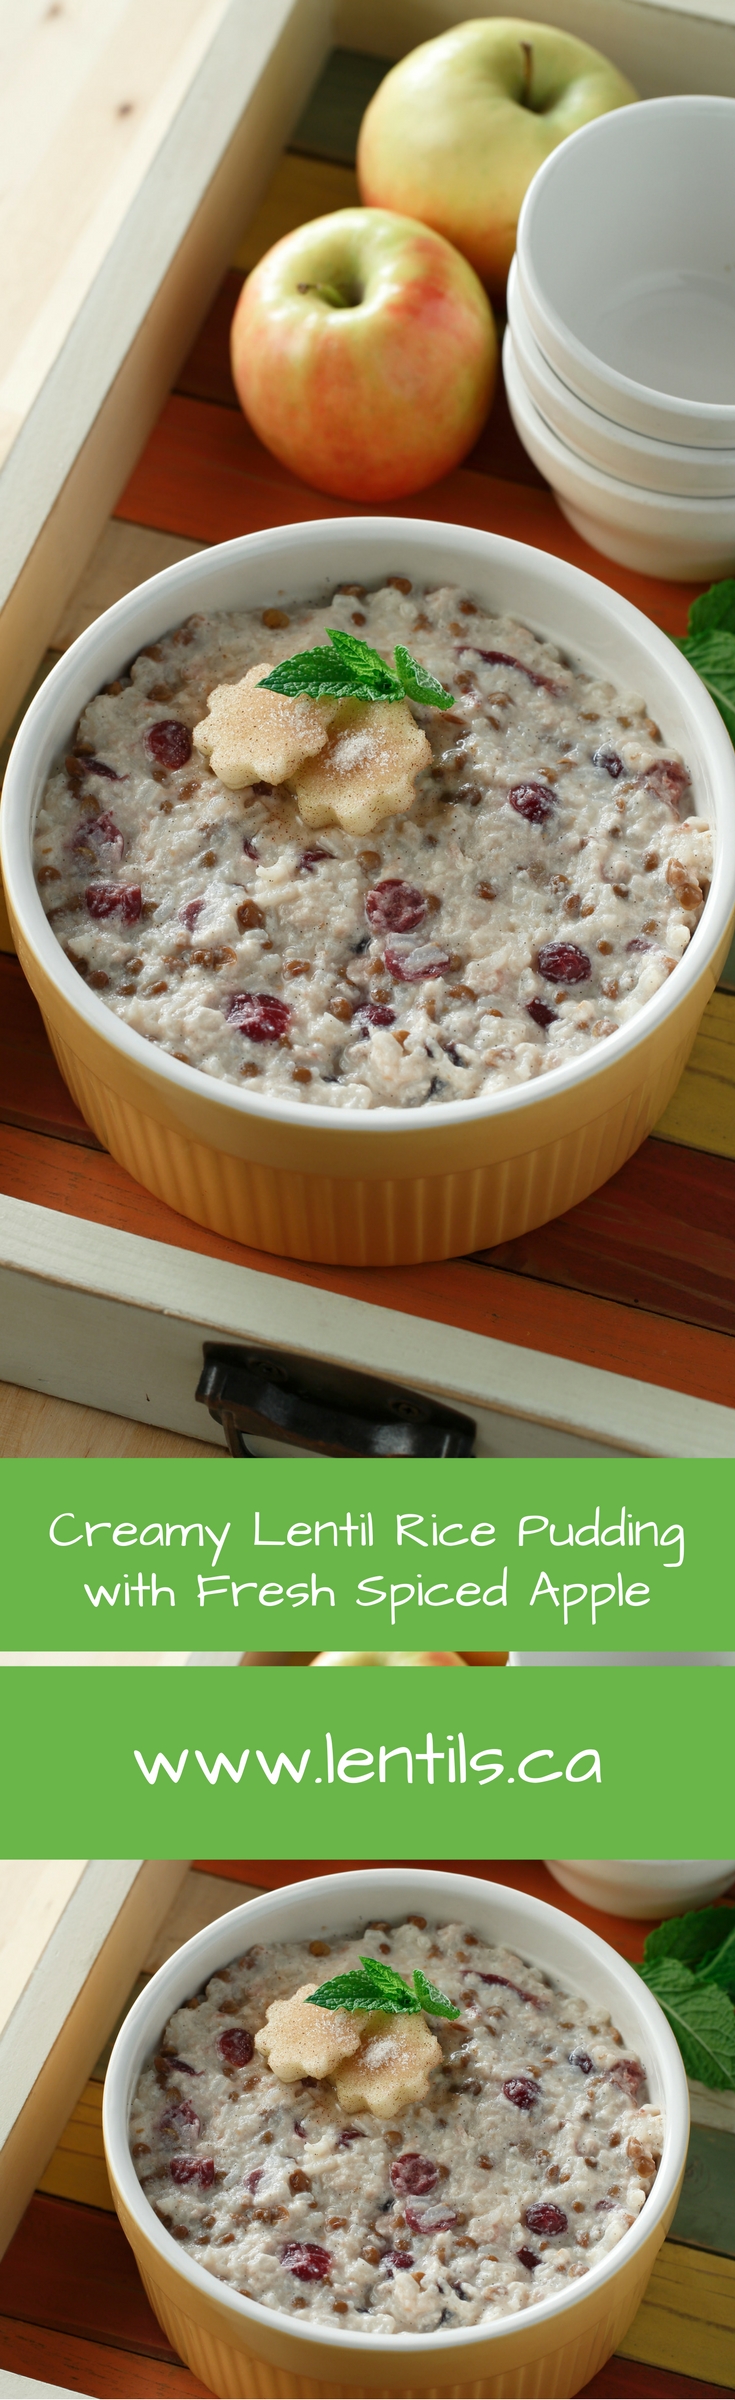 Creamy Lentil Rice Pudding with Fresh Spiced Apple | Lentils.ca